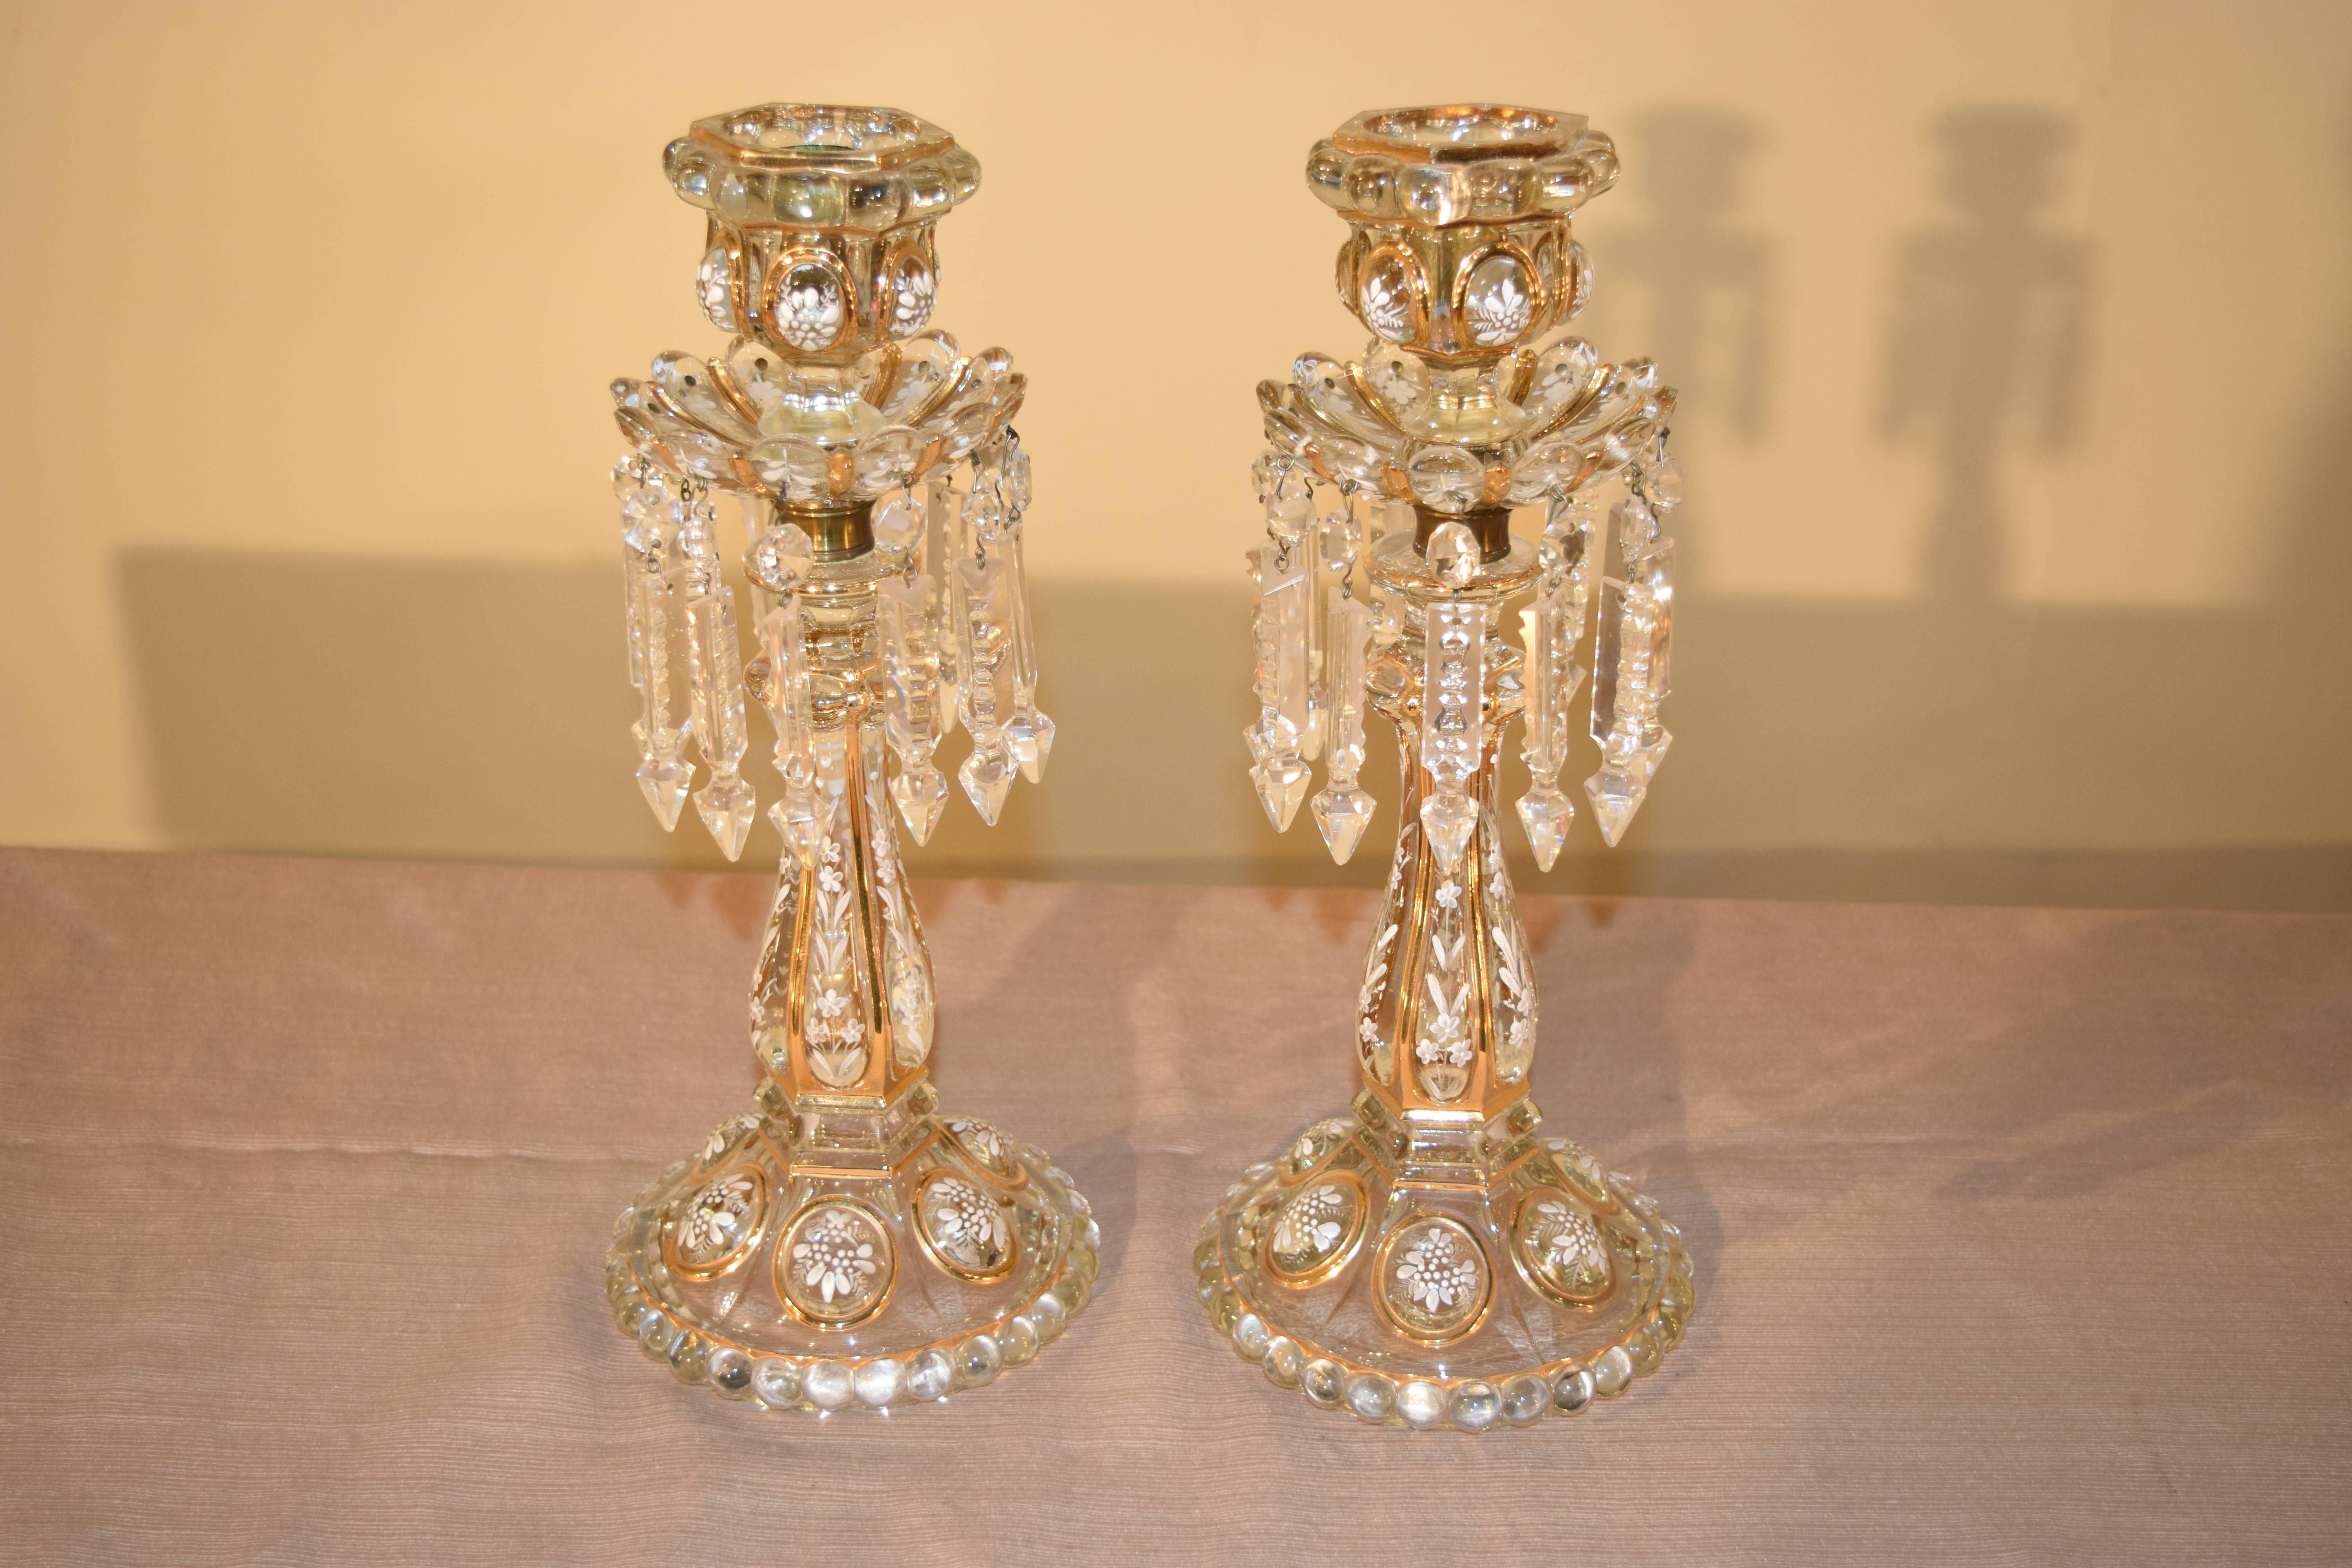 Pair of exquisite Baccarat candlesticks with enameled floral decoration and gilt highlights, circa 1900. They have cut-glass prisms as well.